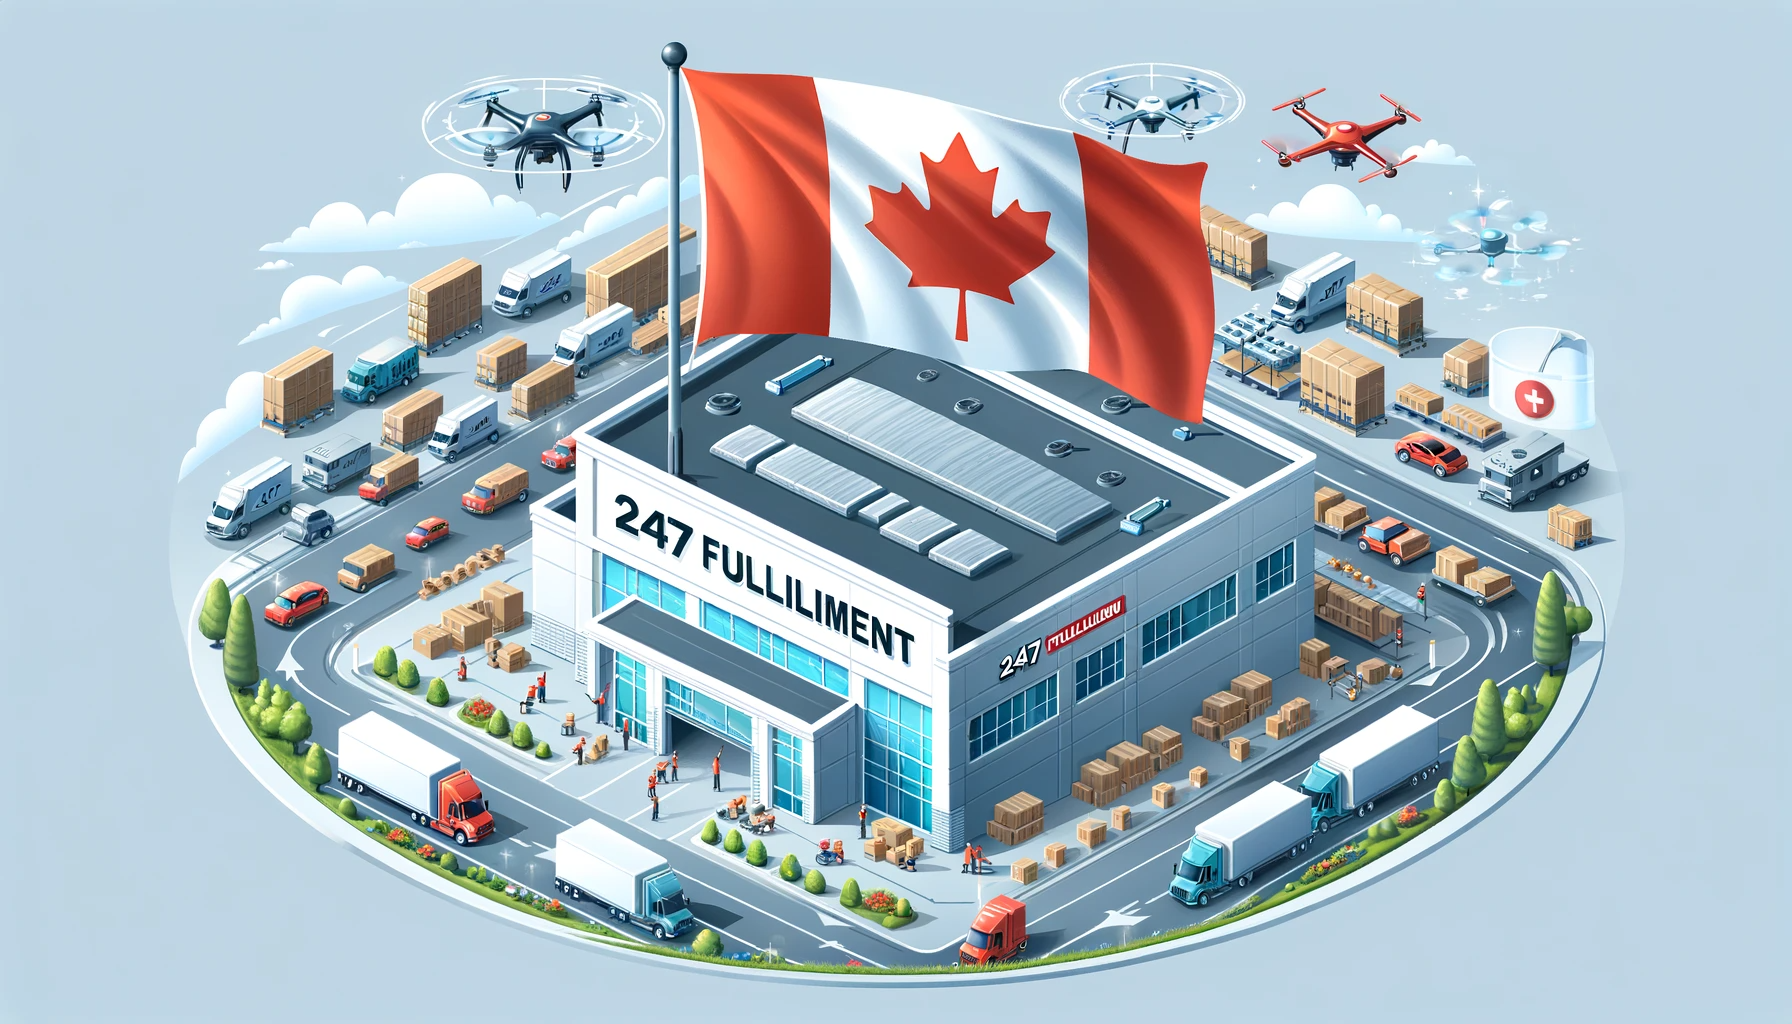 Modern "247 Fulfillment" center in Canada, showcasing a bustling and efficient operation with delivery trucks and drones, under the Canadian flag.